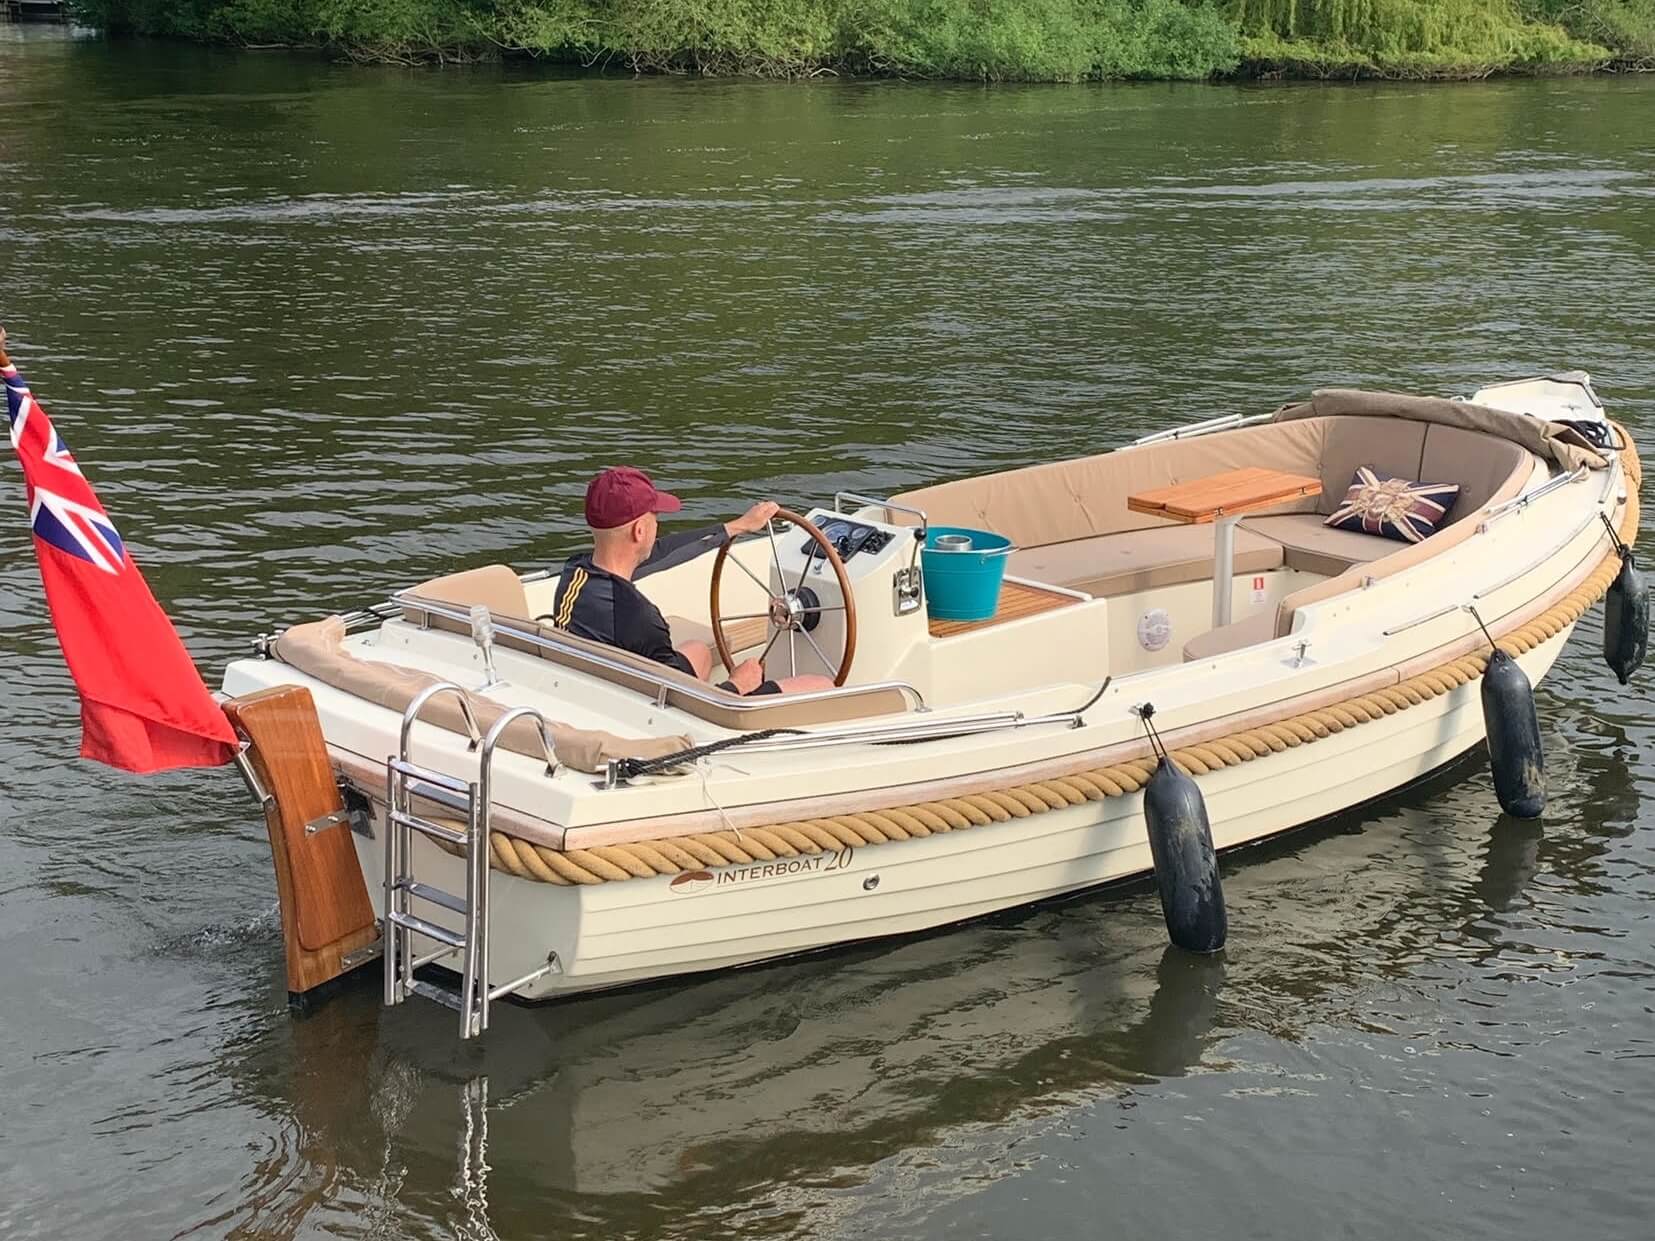 Modern 8-person boat for hire in Henley-on-Thames